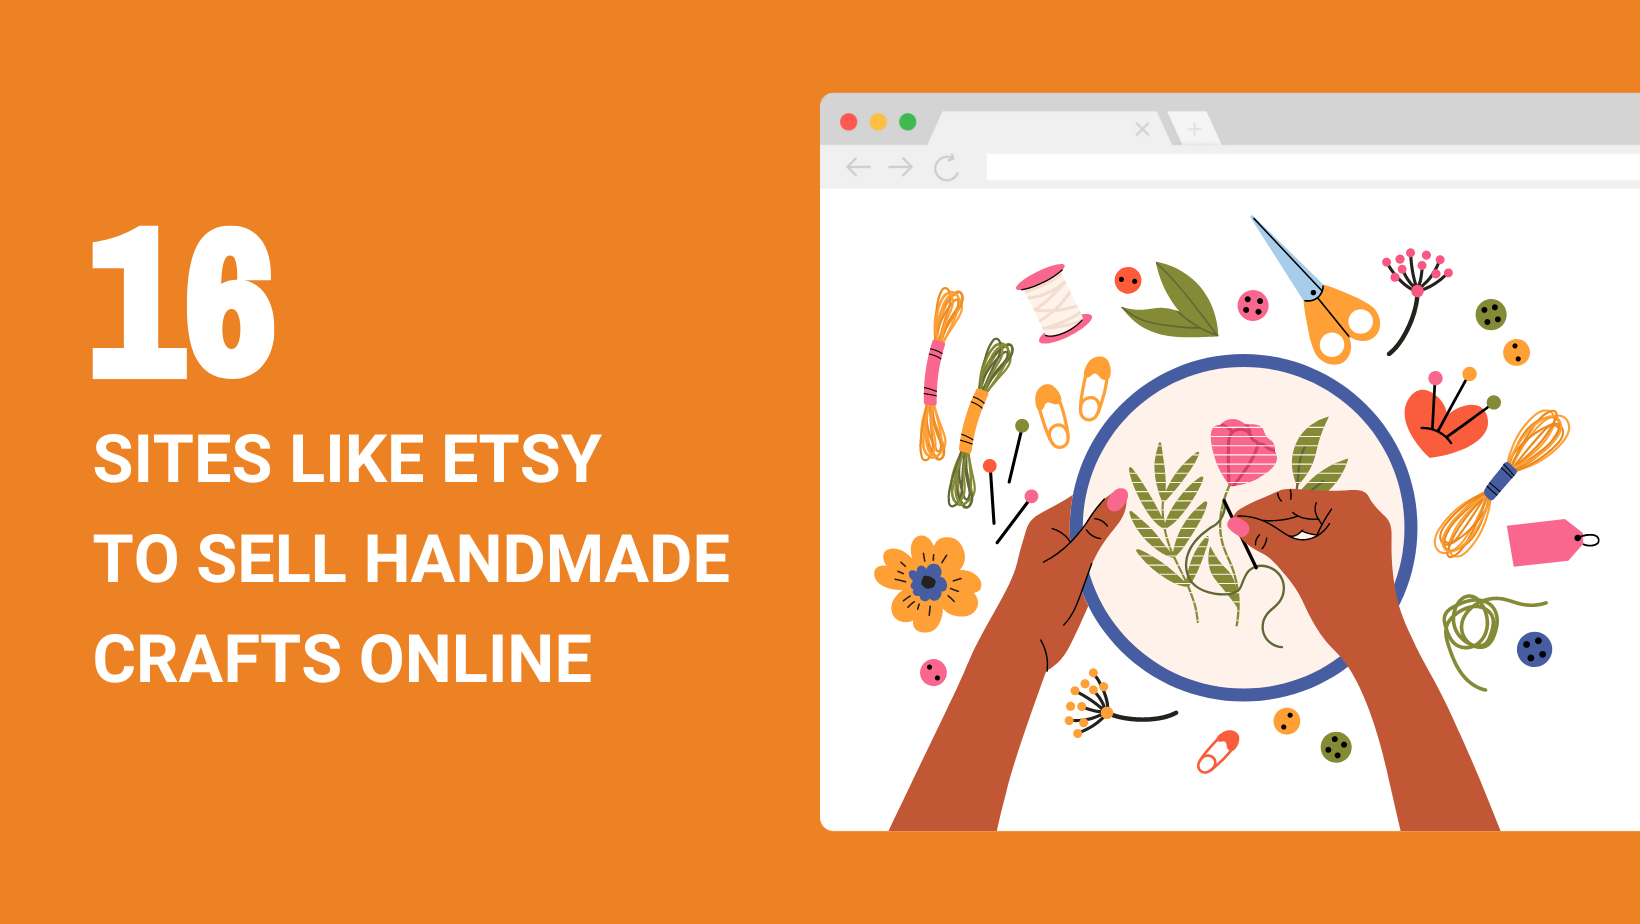 16 SITES LIKE ETSY TO SELL HANDMADE CRAFTS ONLINE